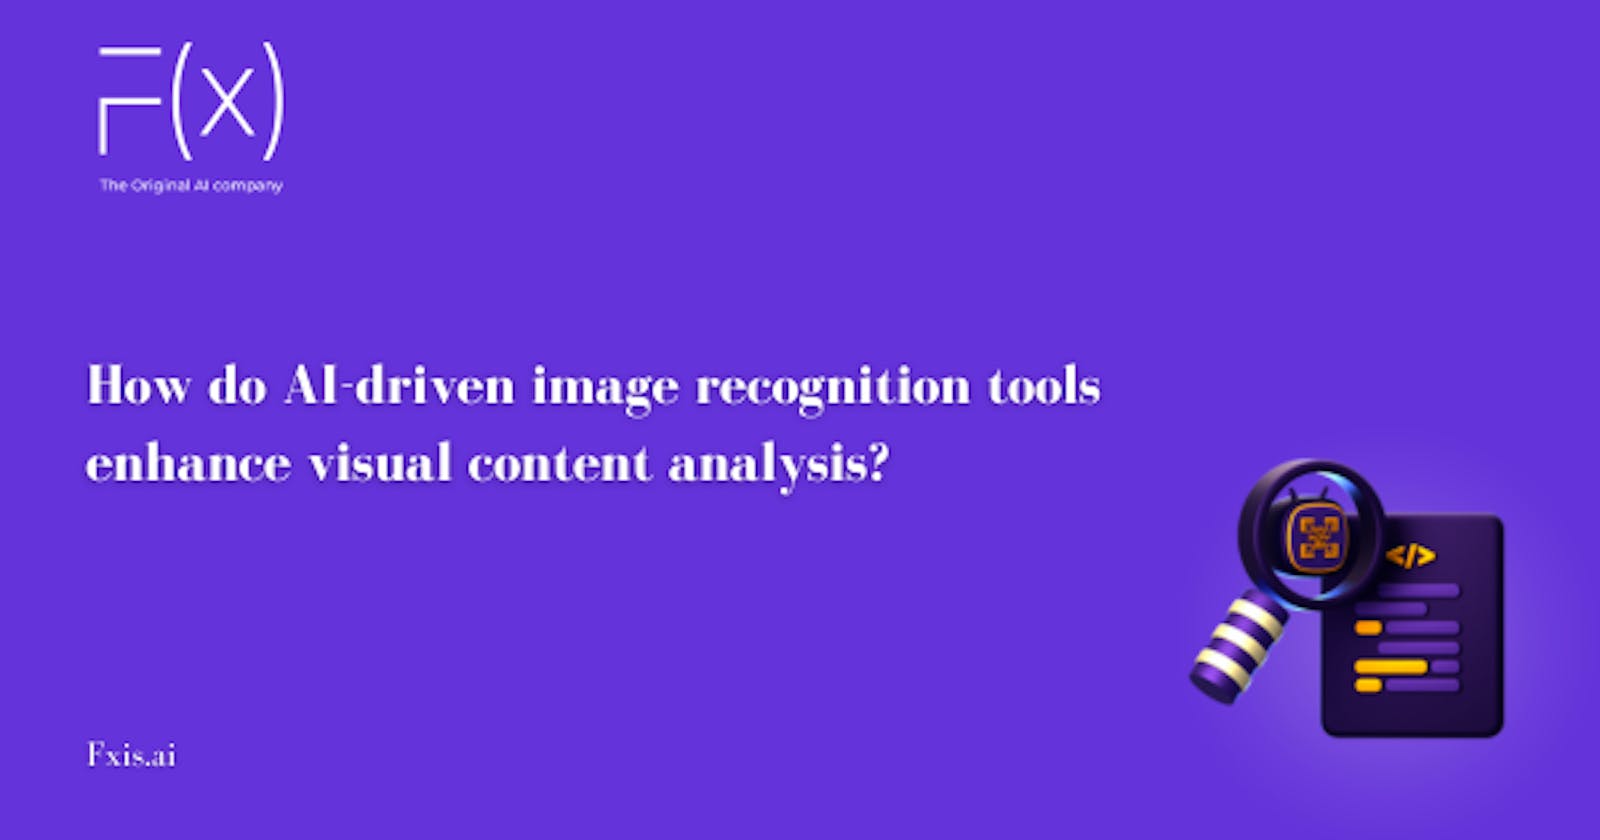 How do AI-driven image recognition tools enhance visual content analysis?